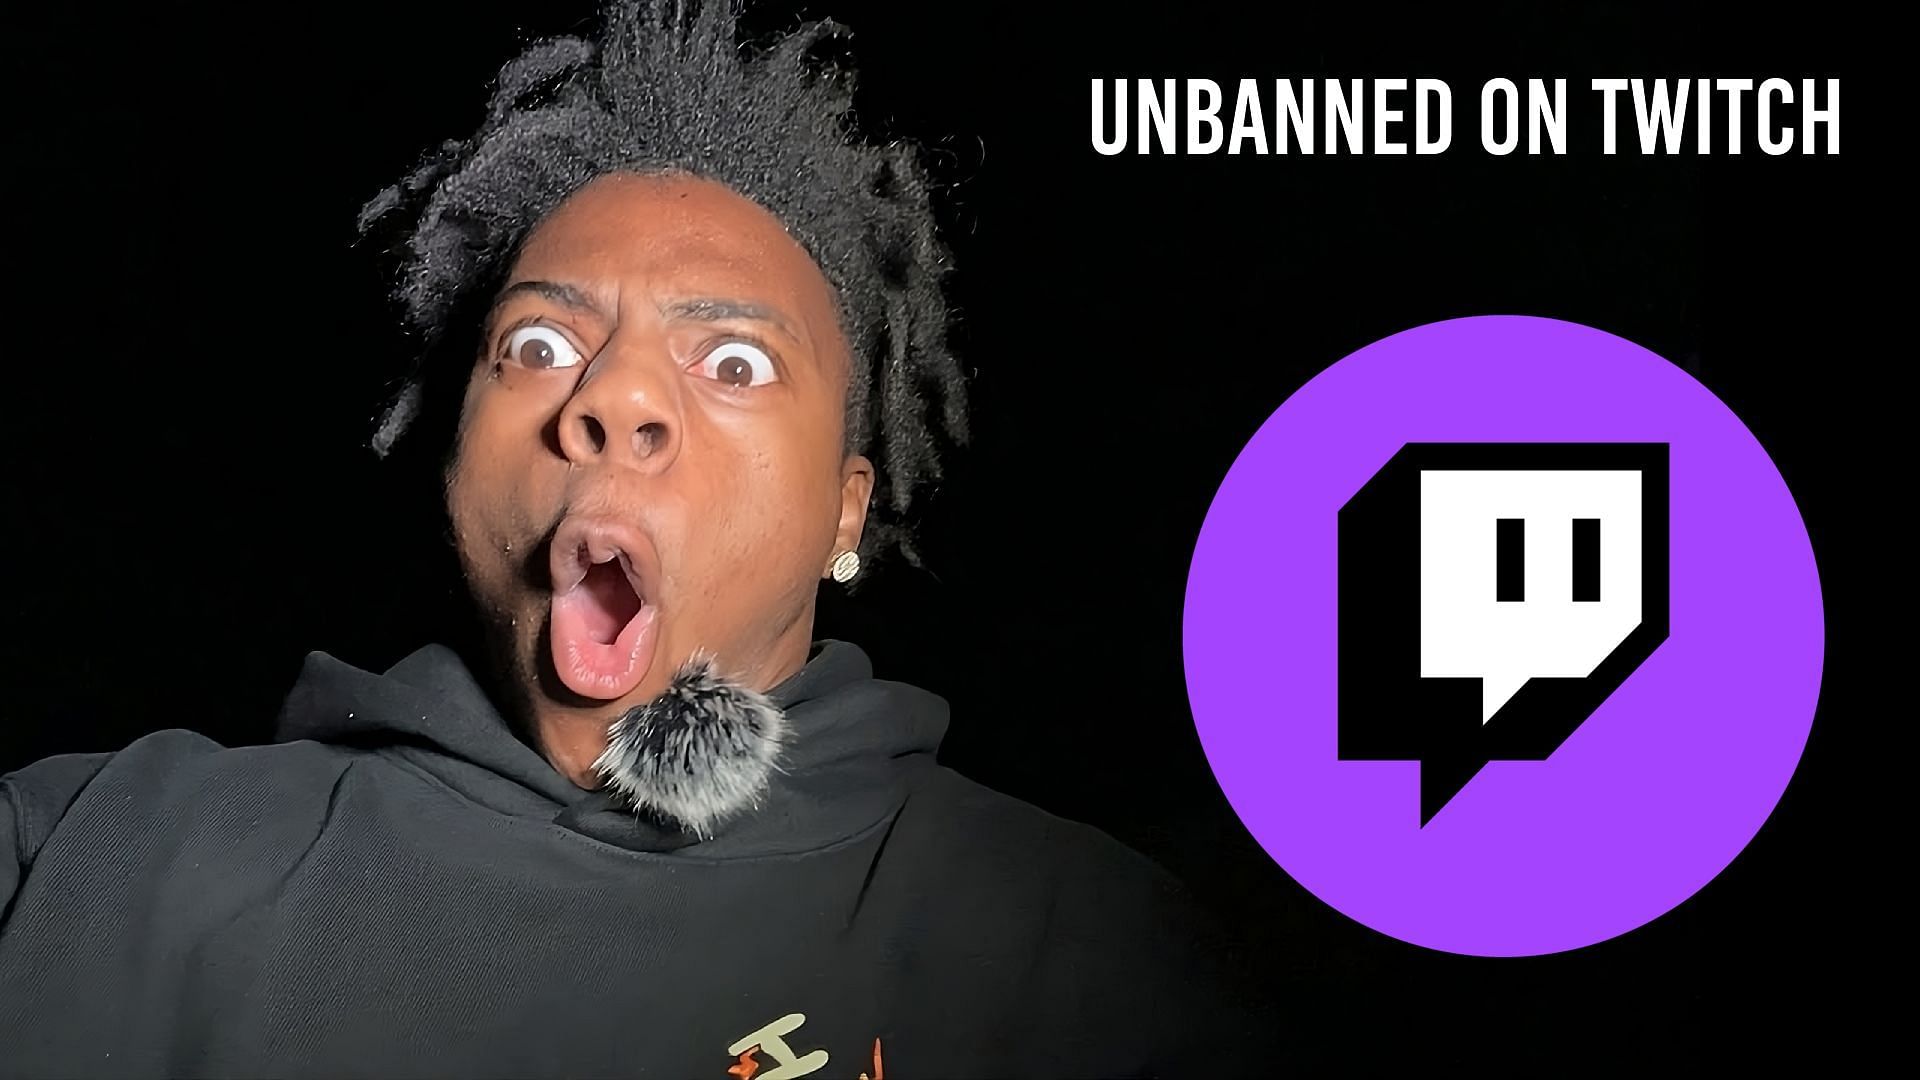 IShowSpeed really got on his knees to ask the CEO of Twitch to unban